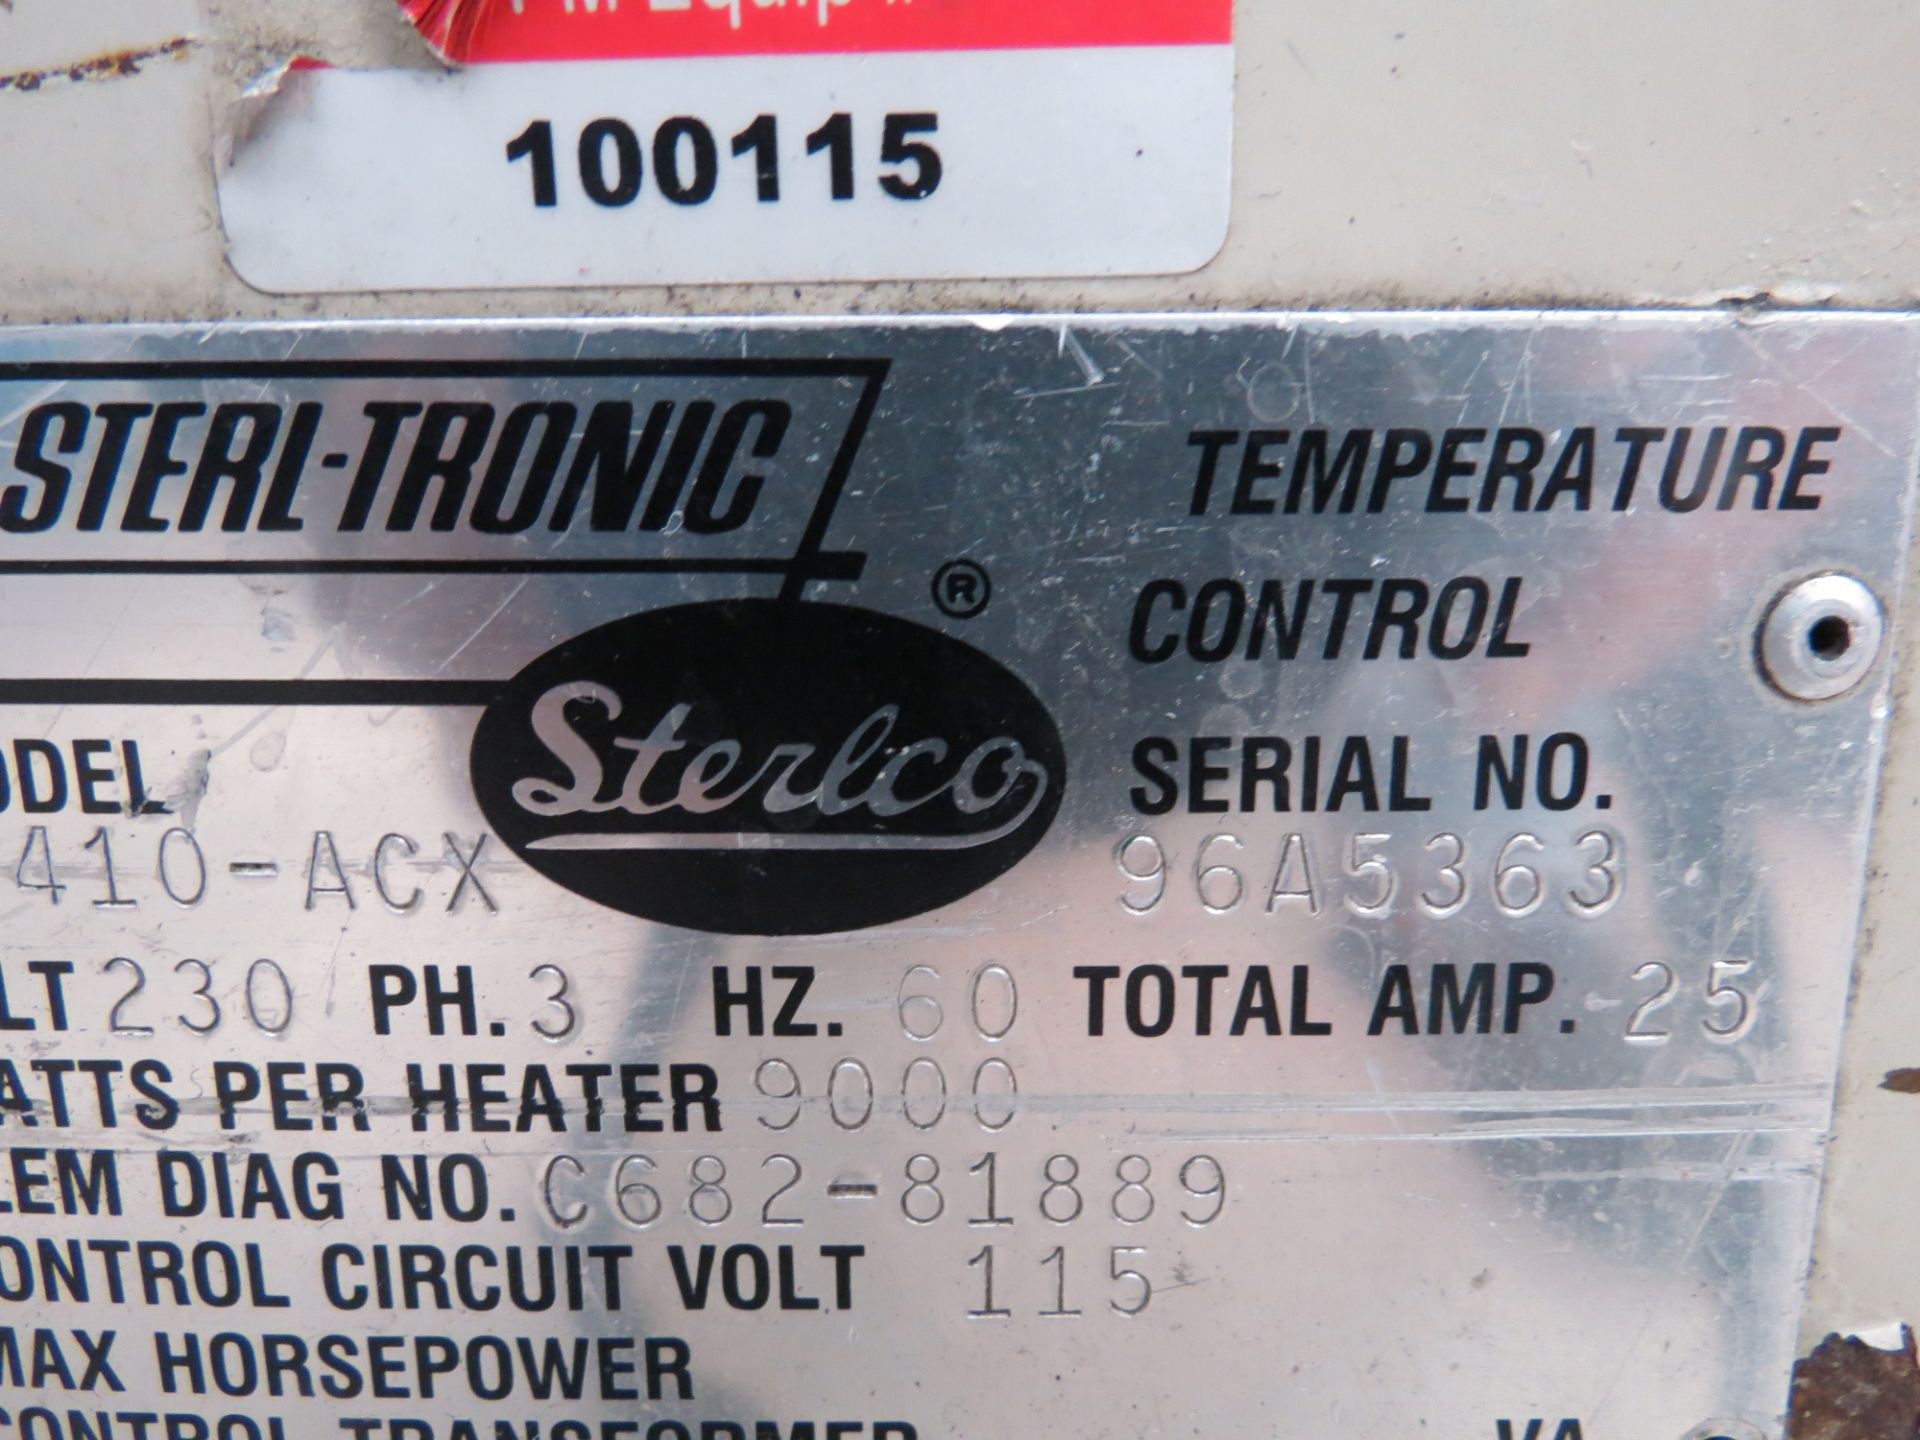 Sterlco Temperature Control Asset # 14, S/N # 96A5363 - Image 5 of 5